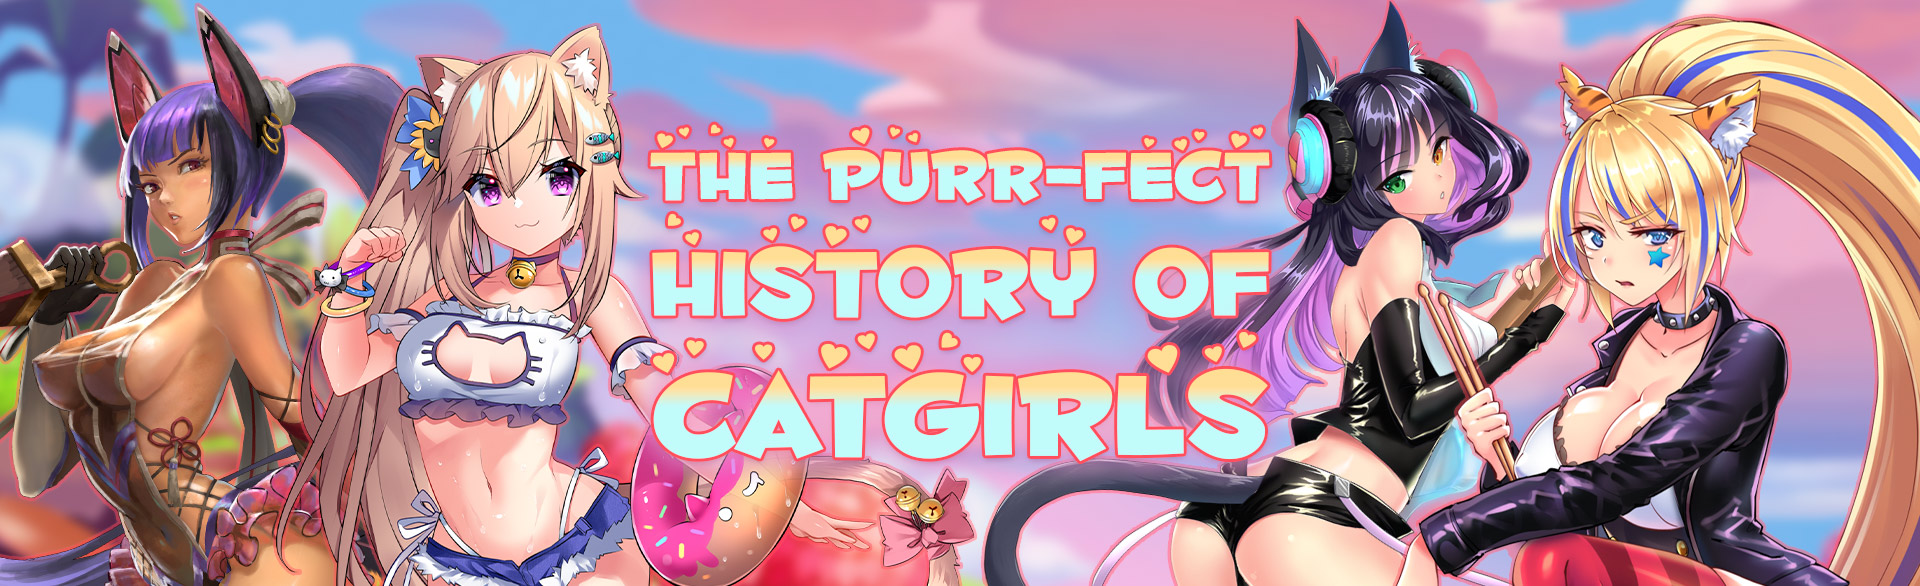 The Purr-Fect History of Catgirls